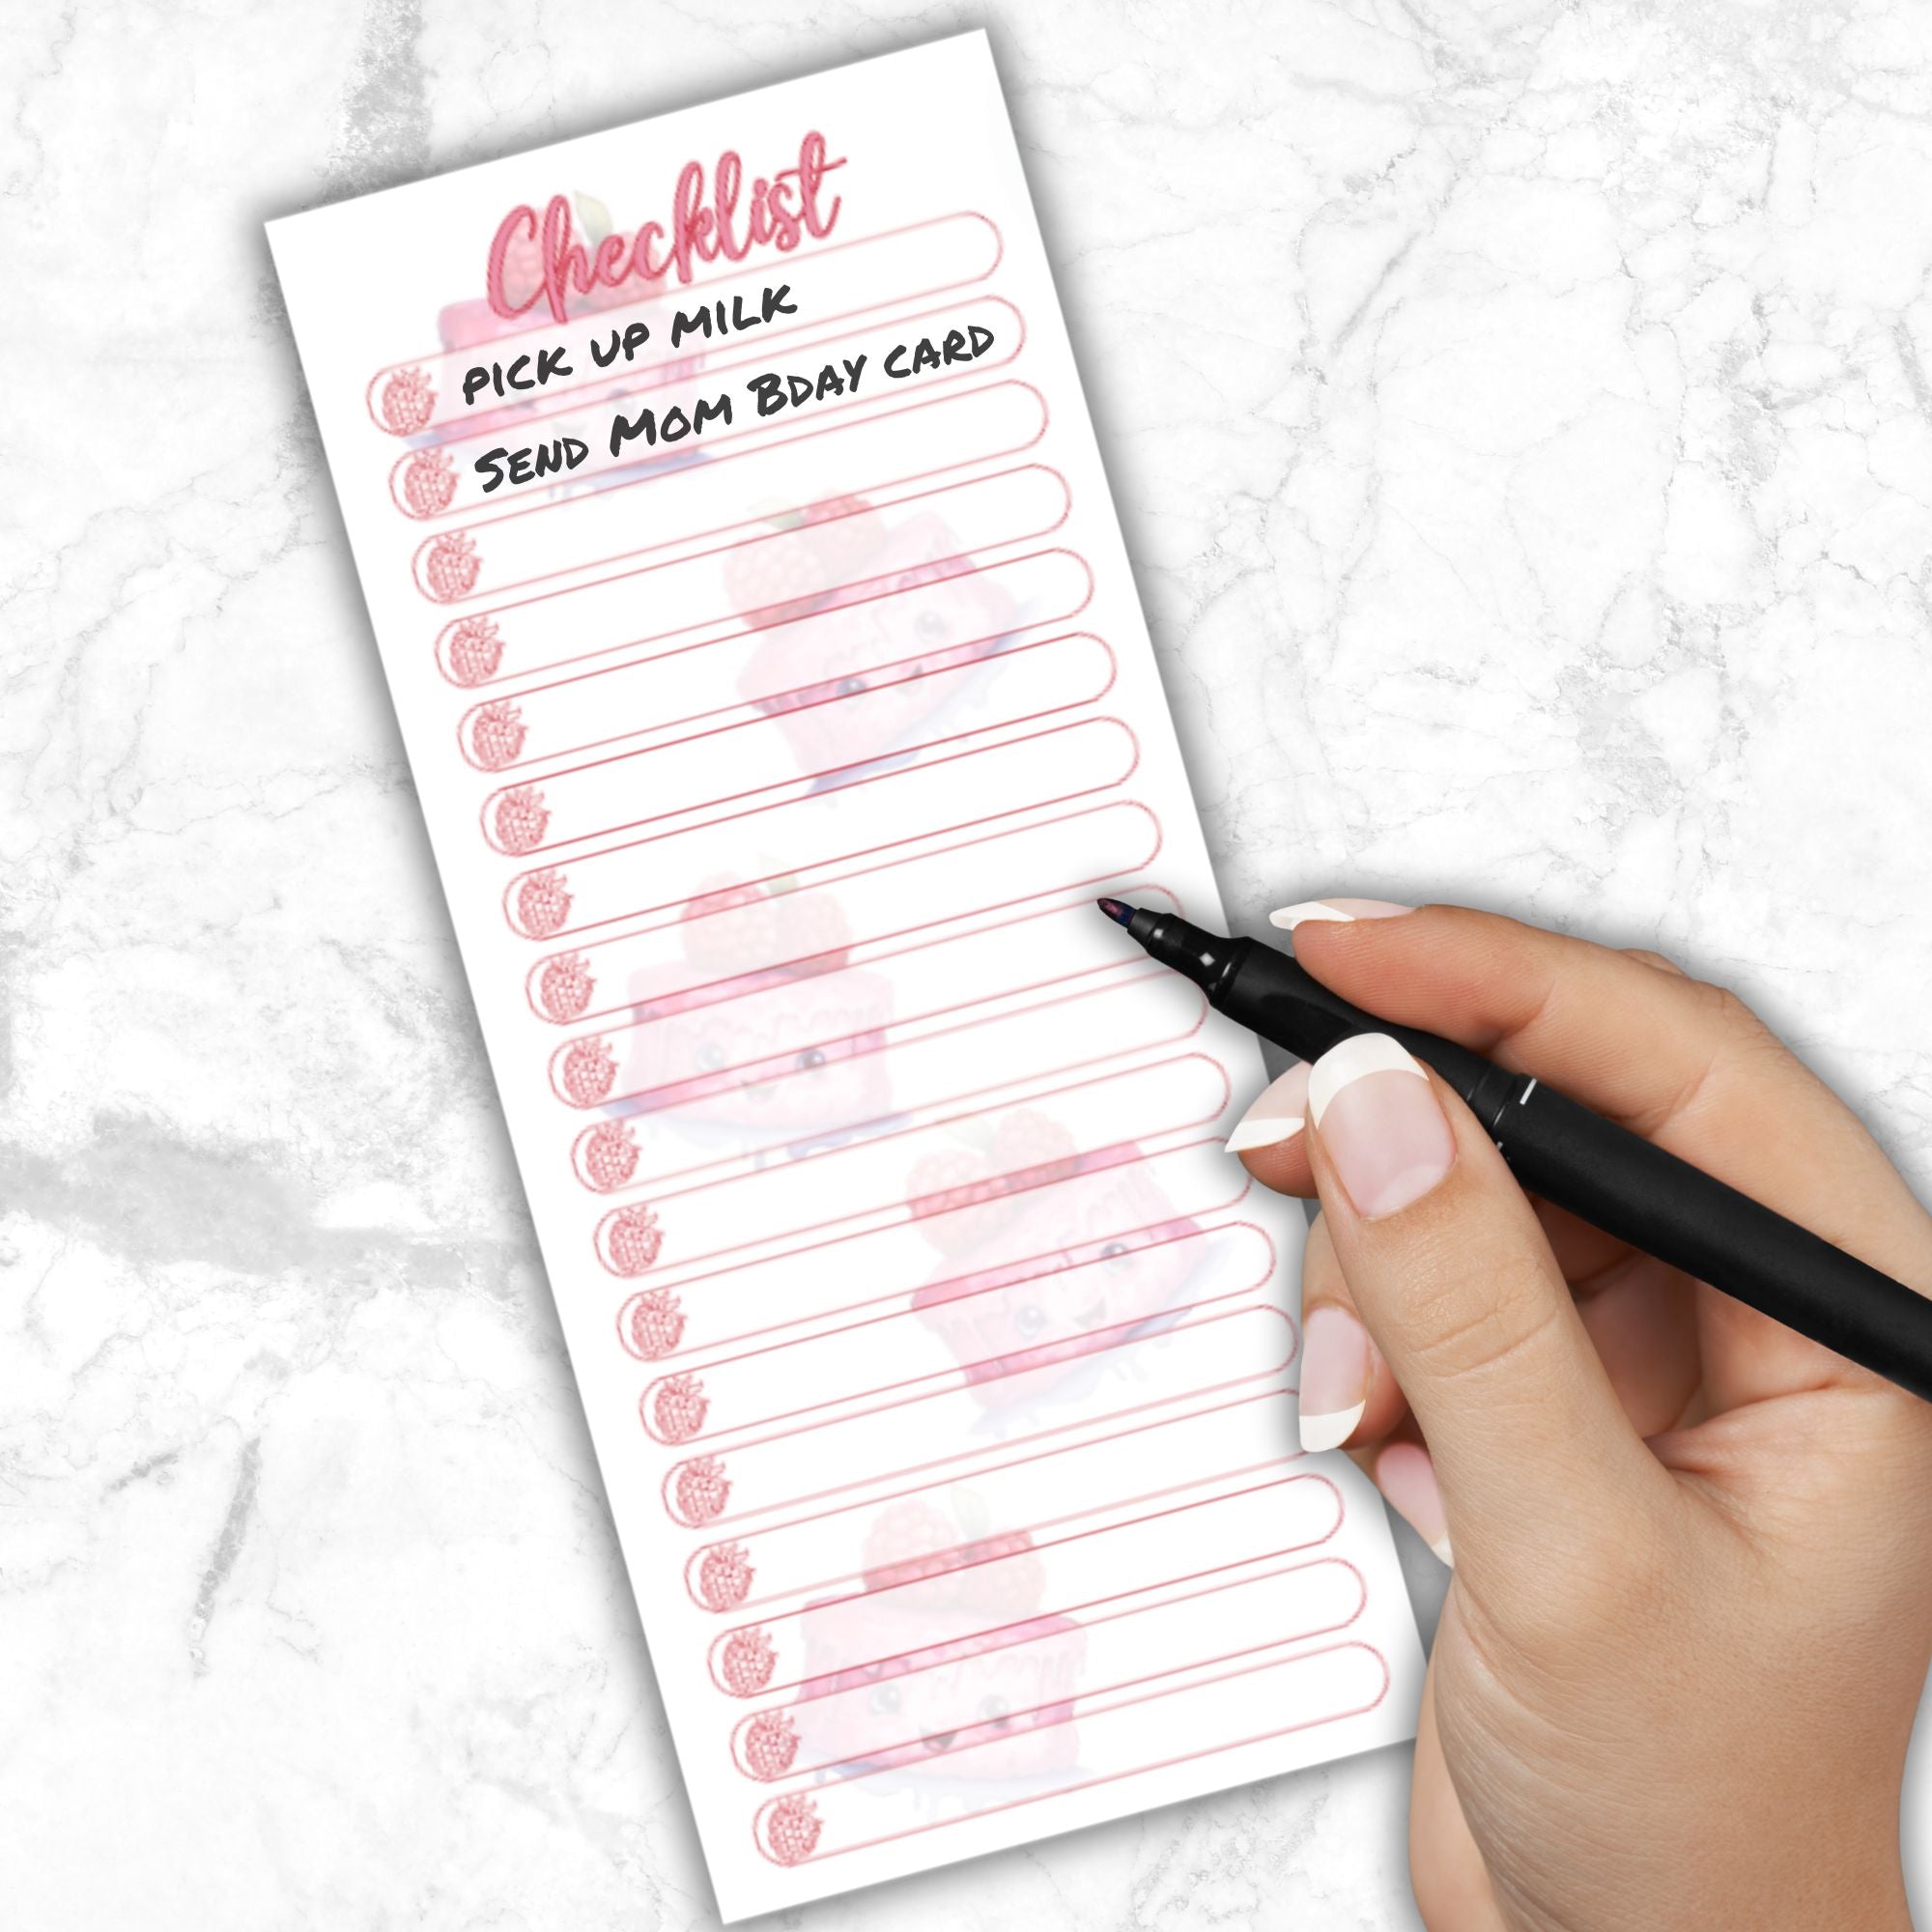 This image show a Checklist Notepad - Raspberry Cakes with a list started on it.